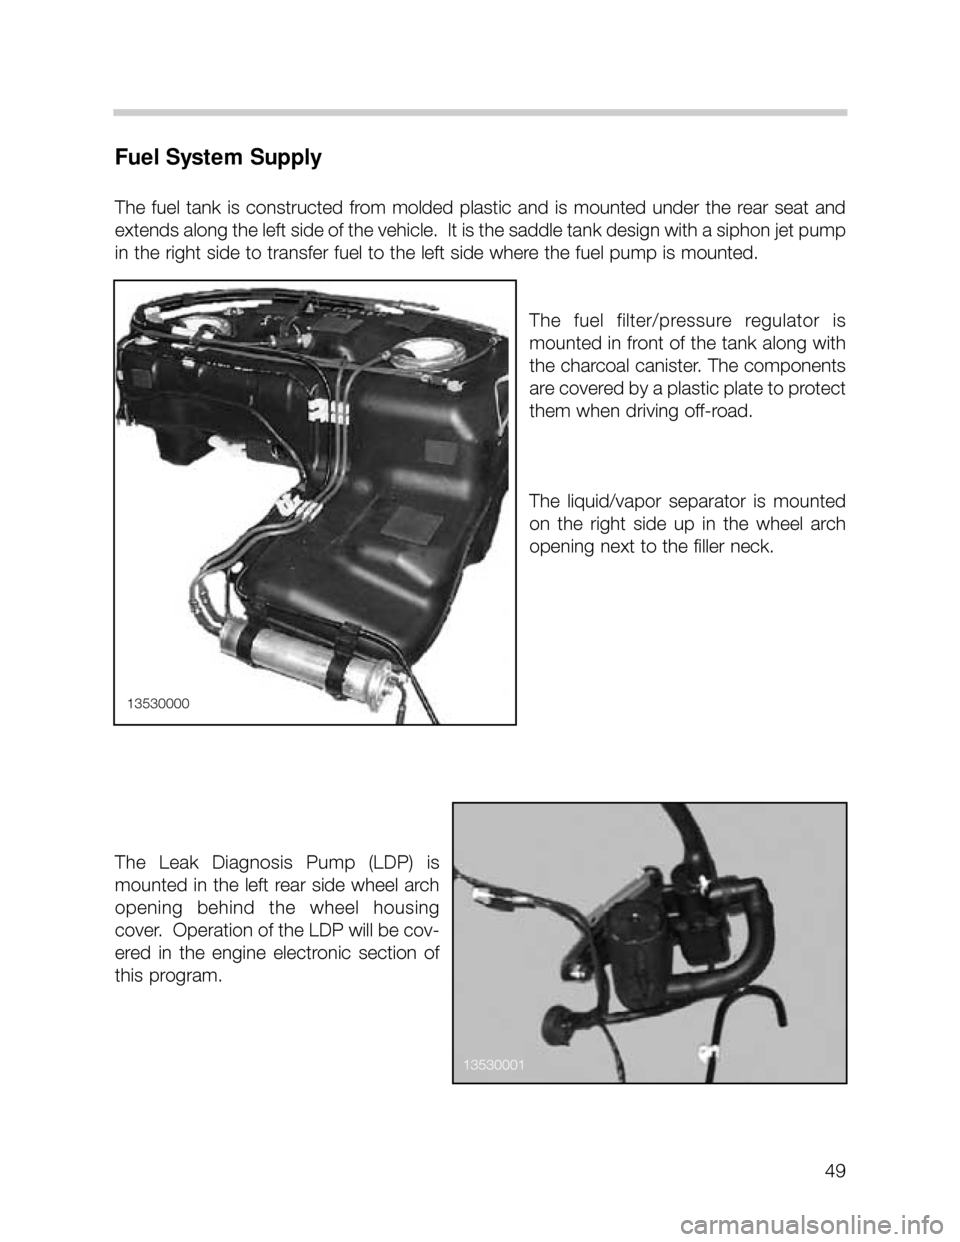 BMW X5 2002 E53 Service Manual 49
Fuel System Supply
The  fuel  tank  is  constructed  from  molded  plastic  and  is  mounted  under  the  rear  seat  and
extends along the left side of the vehicle.  It is the saddle tank design w